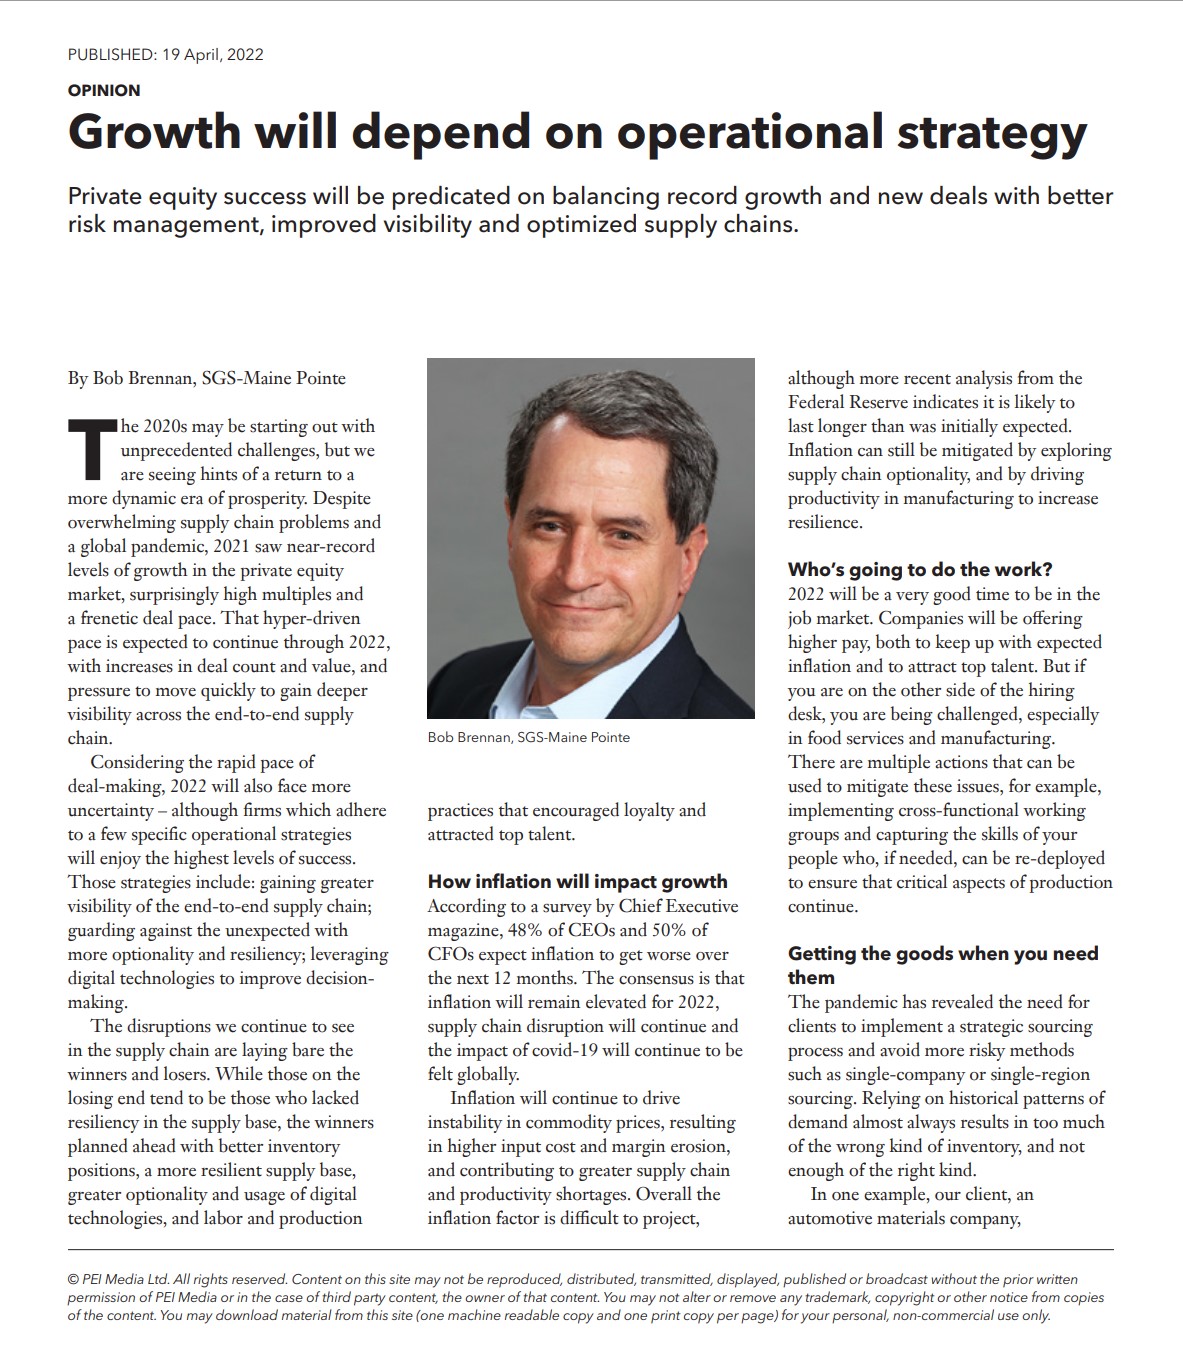 Opinion: Growth will depend on operational strategy